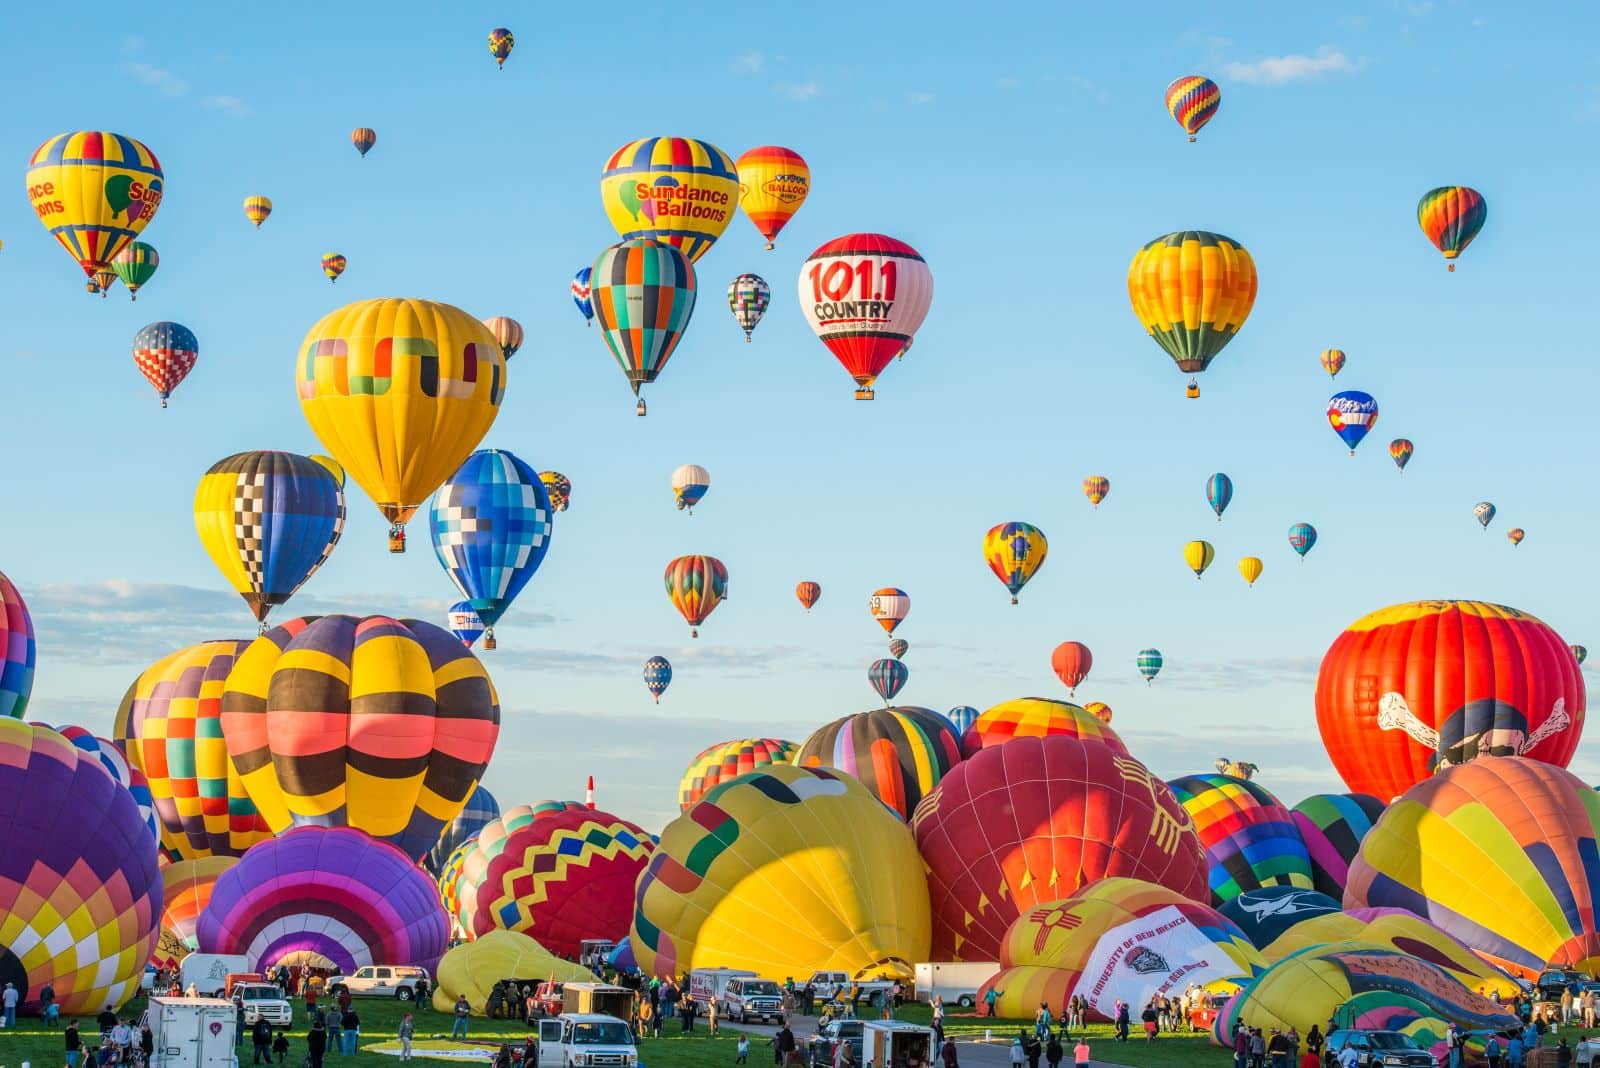 Image credit: Shutterstock / Wirestock Creators <p>Known for its hot air balloon festivals and Southwestern culture, Albuquerque offers affordable lodging and dining options. Plan to spend around $60 a day.</p>